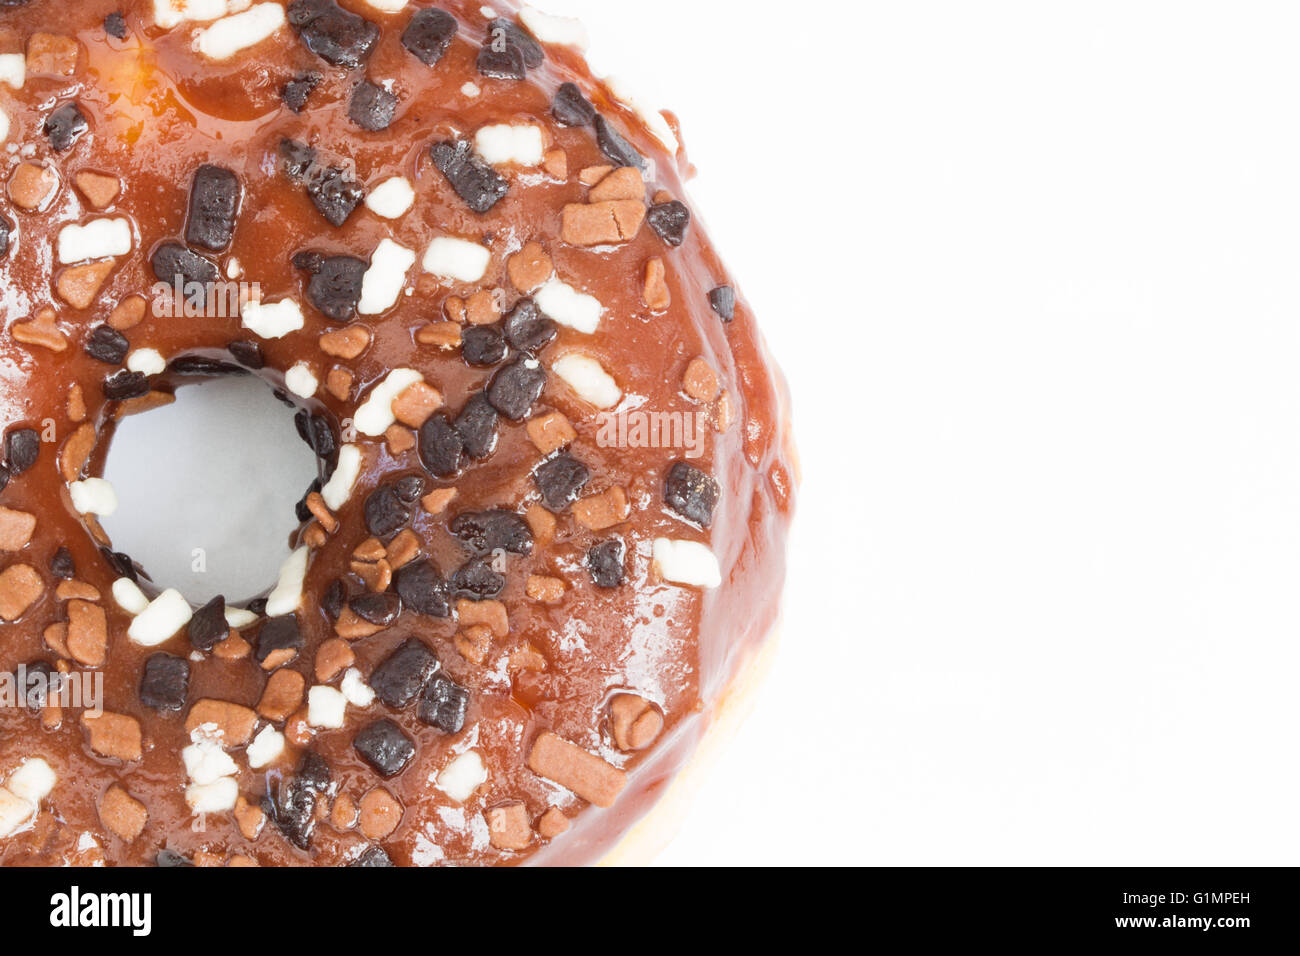 A large donut with chocolate icing and sprinkles showing its hole on an isolated white background. Stock Photo